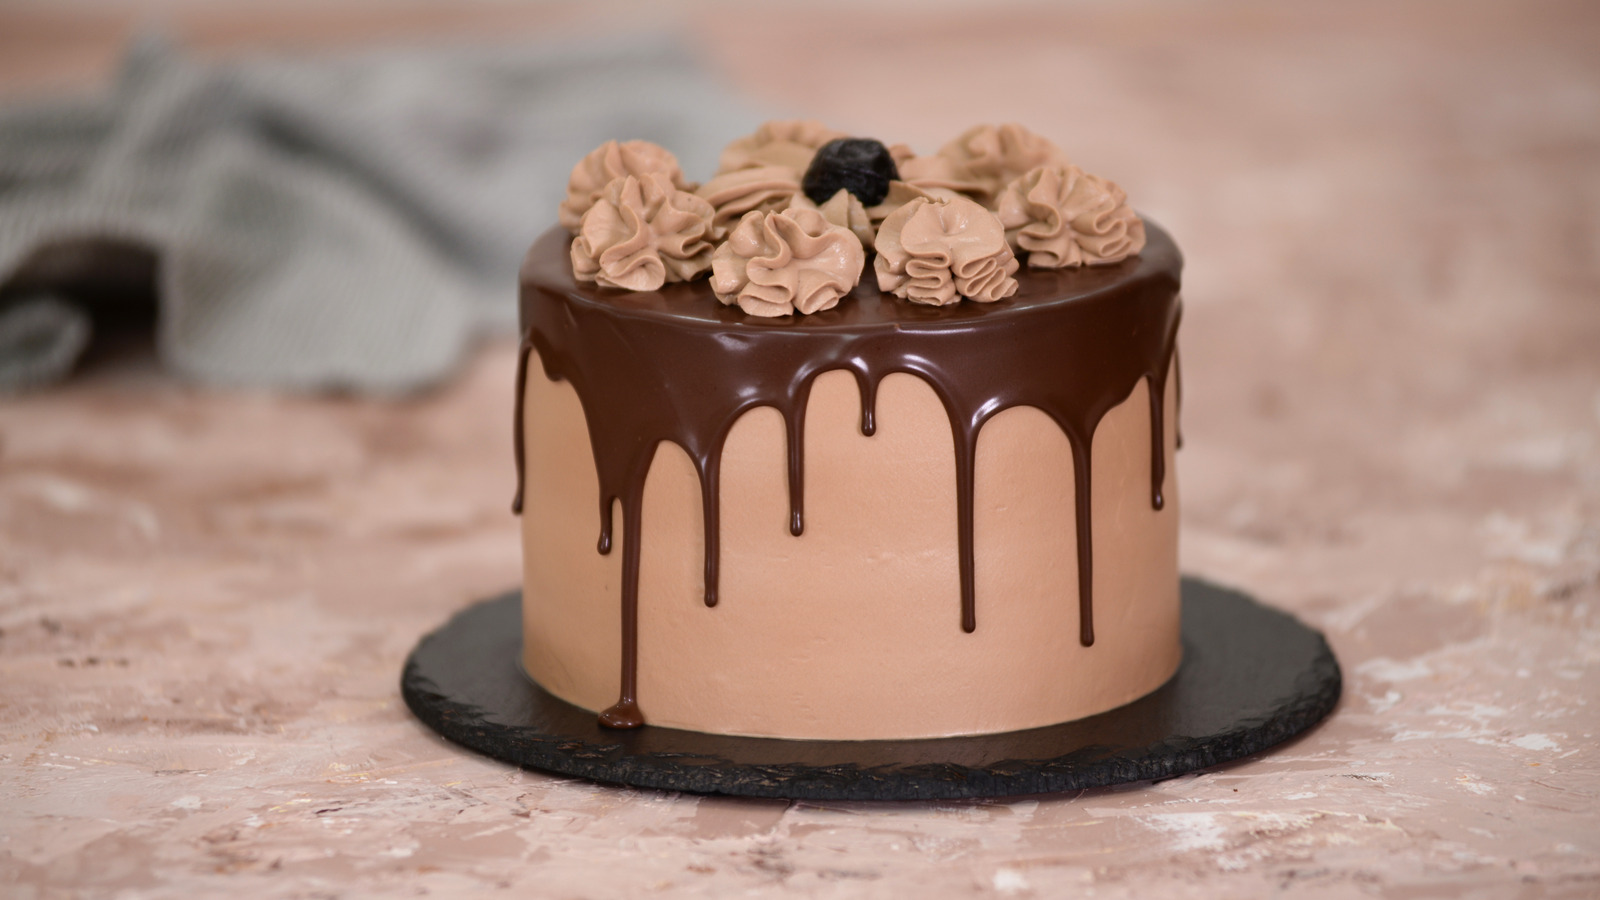 15 Different Types of Cake - Types of Cake and Examples